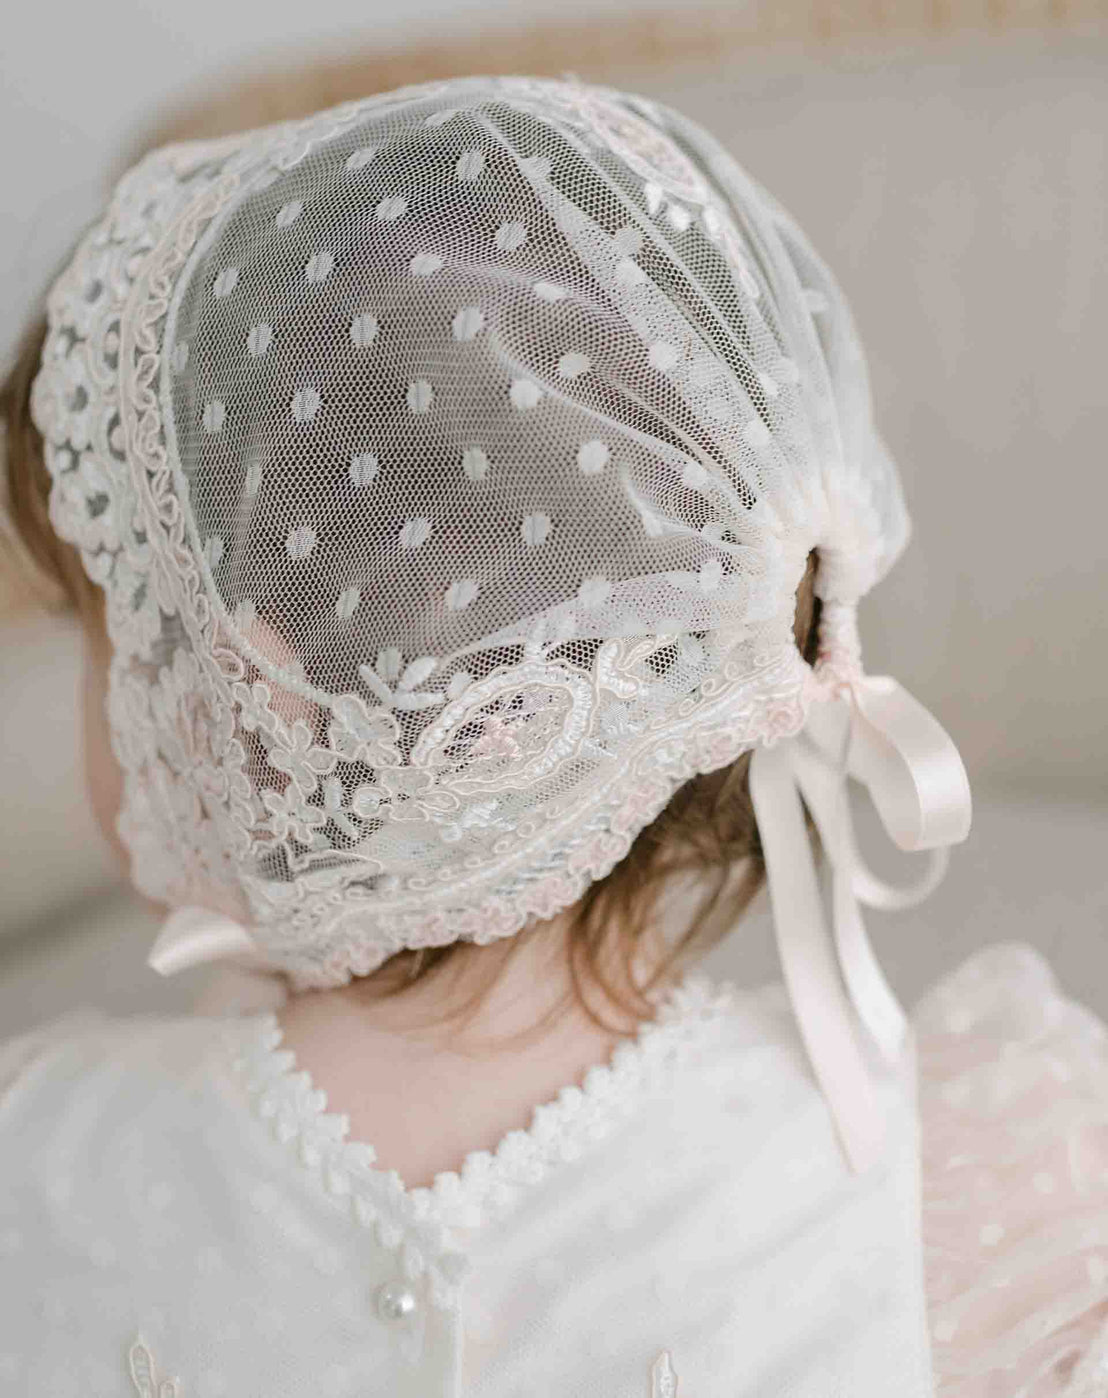 A toddler viewed from behind wearing an Elizabeth Lace Bonnet with polka dots and a ribbon, paired with an upscale white embroidered dress for a christening.